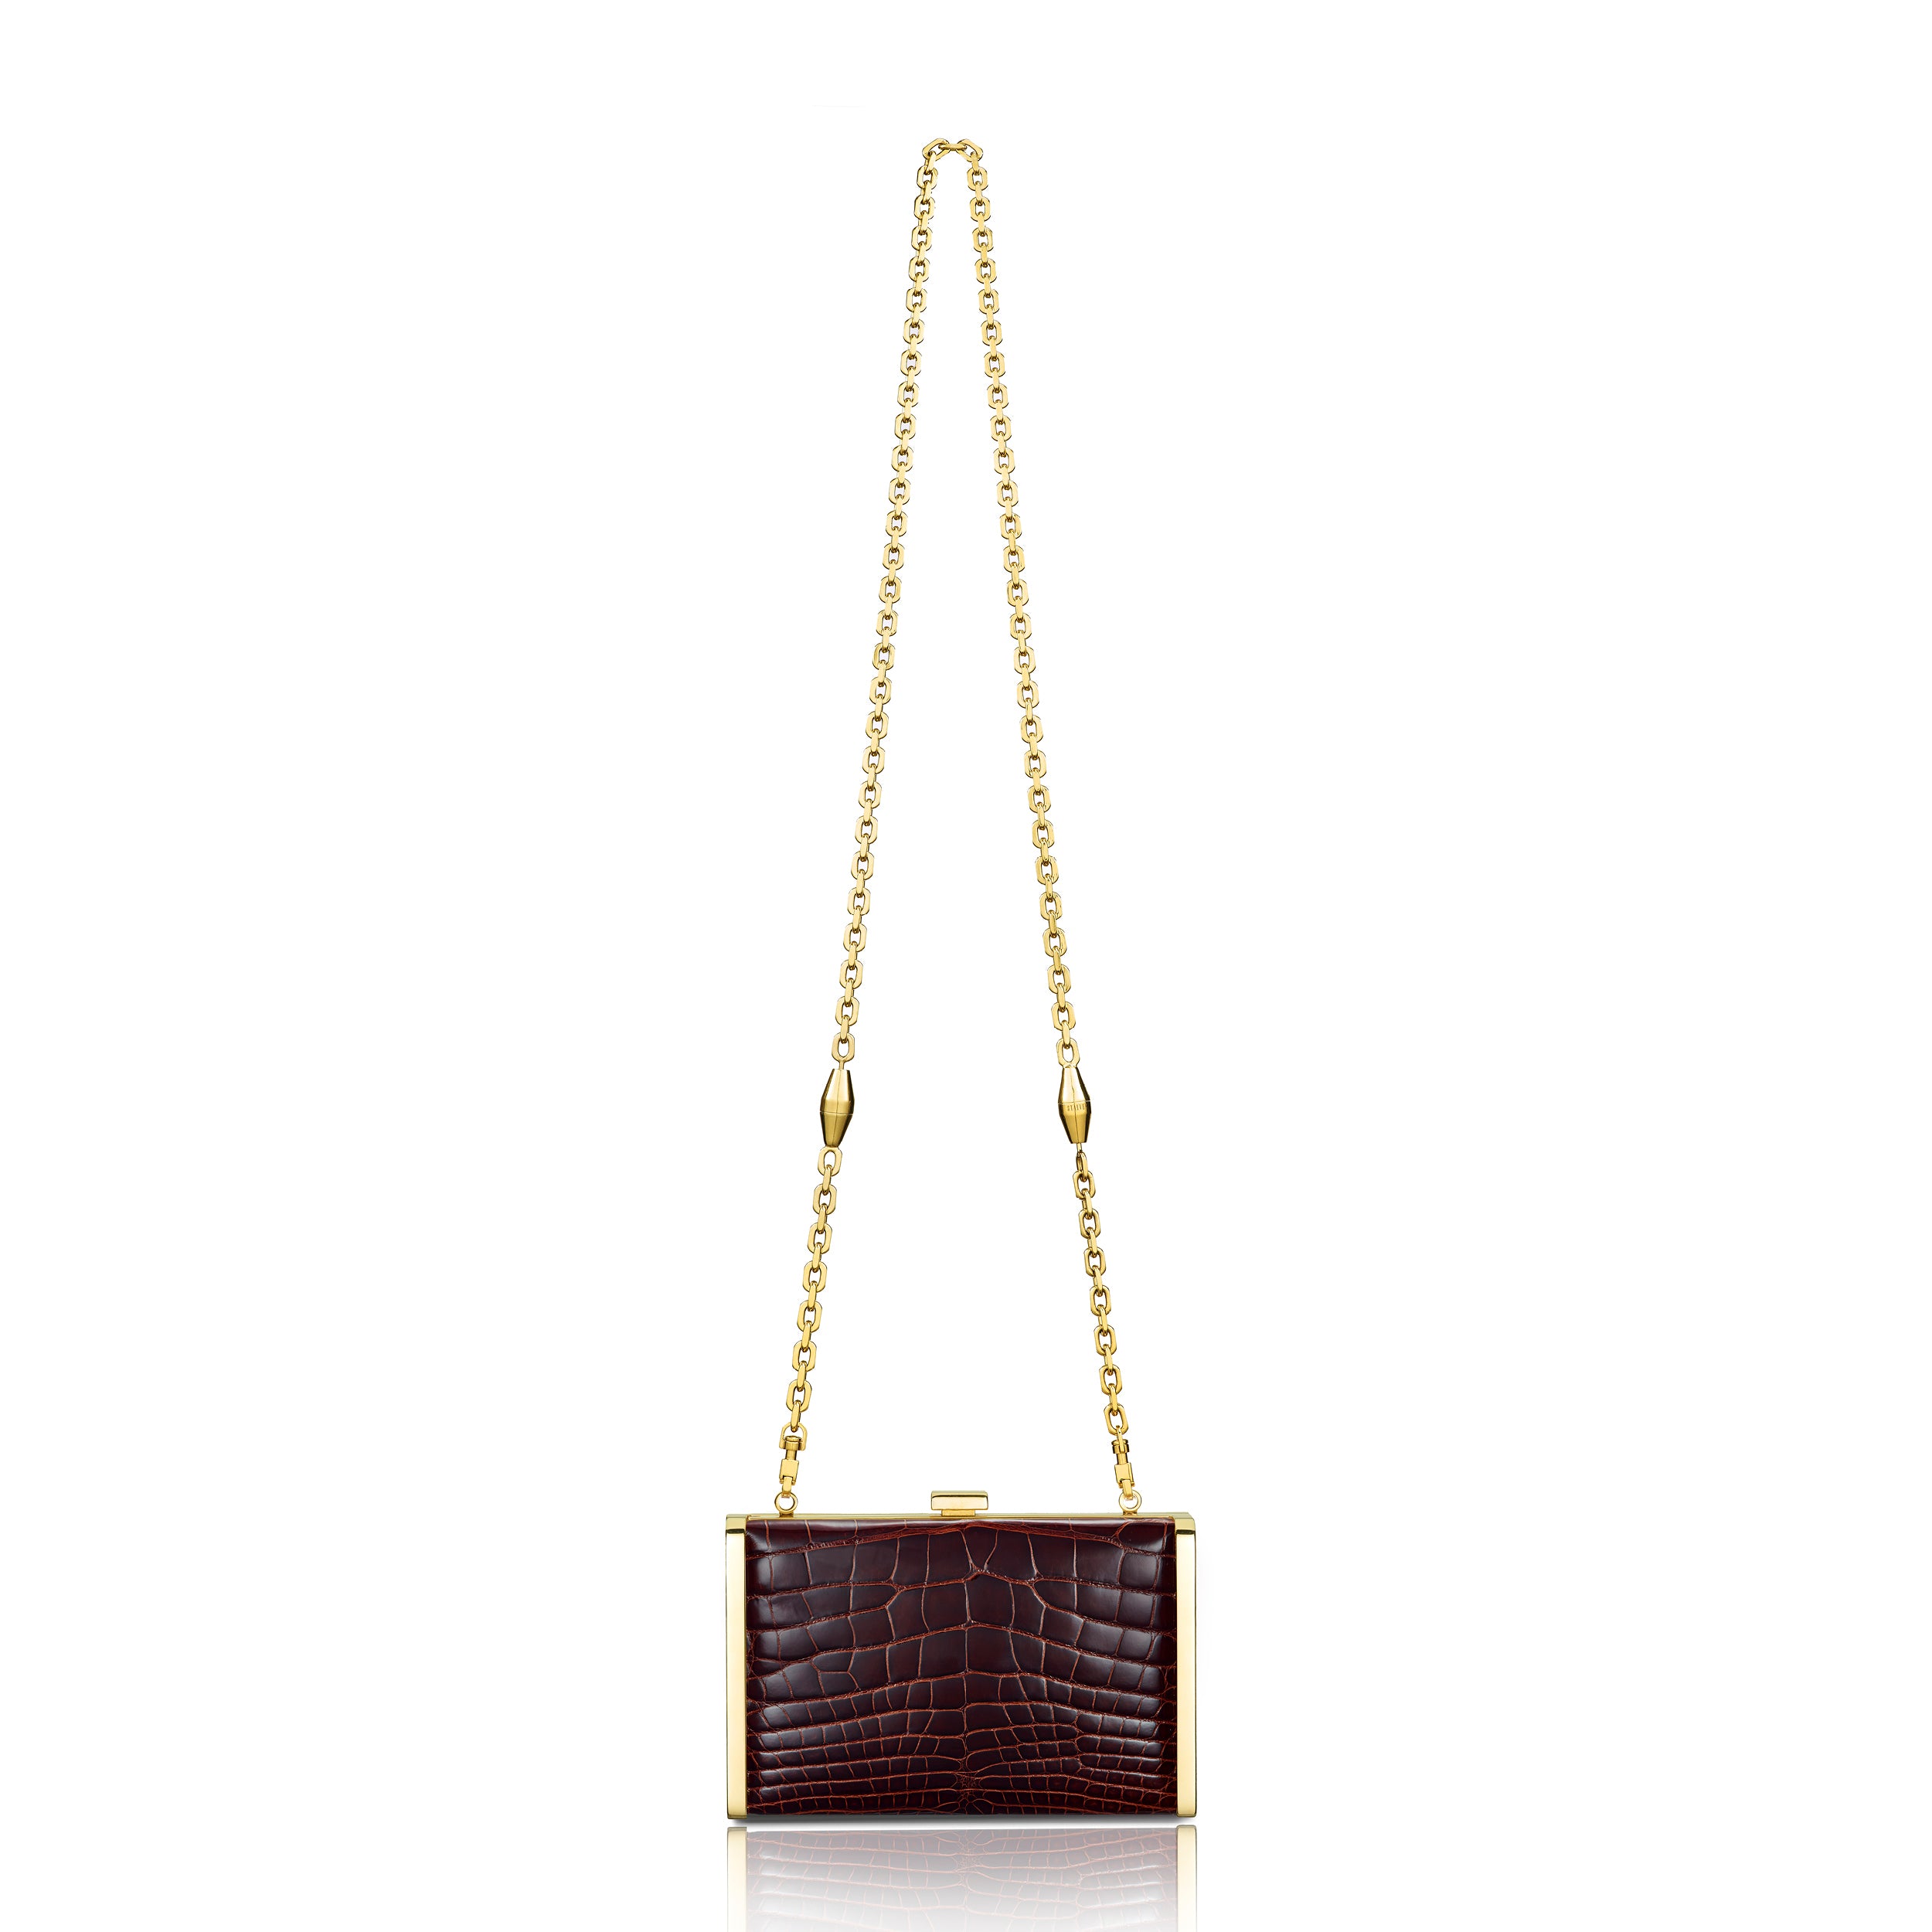 STALVEY Rounded Clutch in Burgundy Alligator with 24kt Gold Hardware Back View with Chain